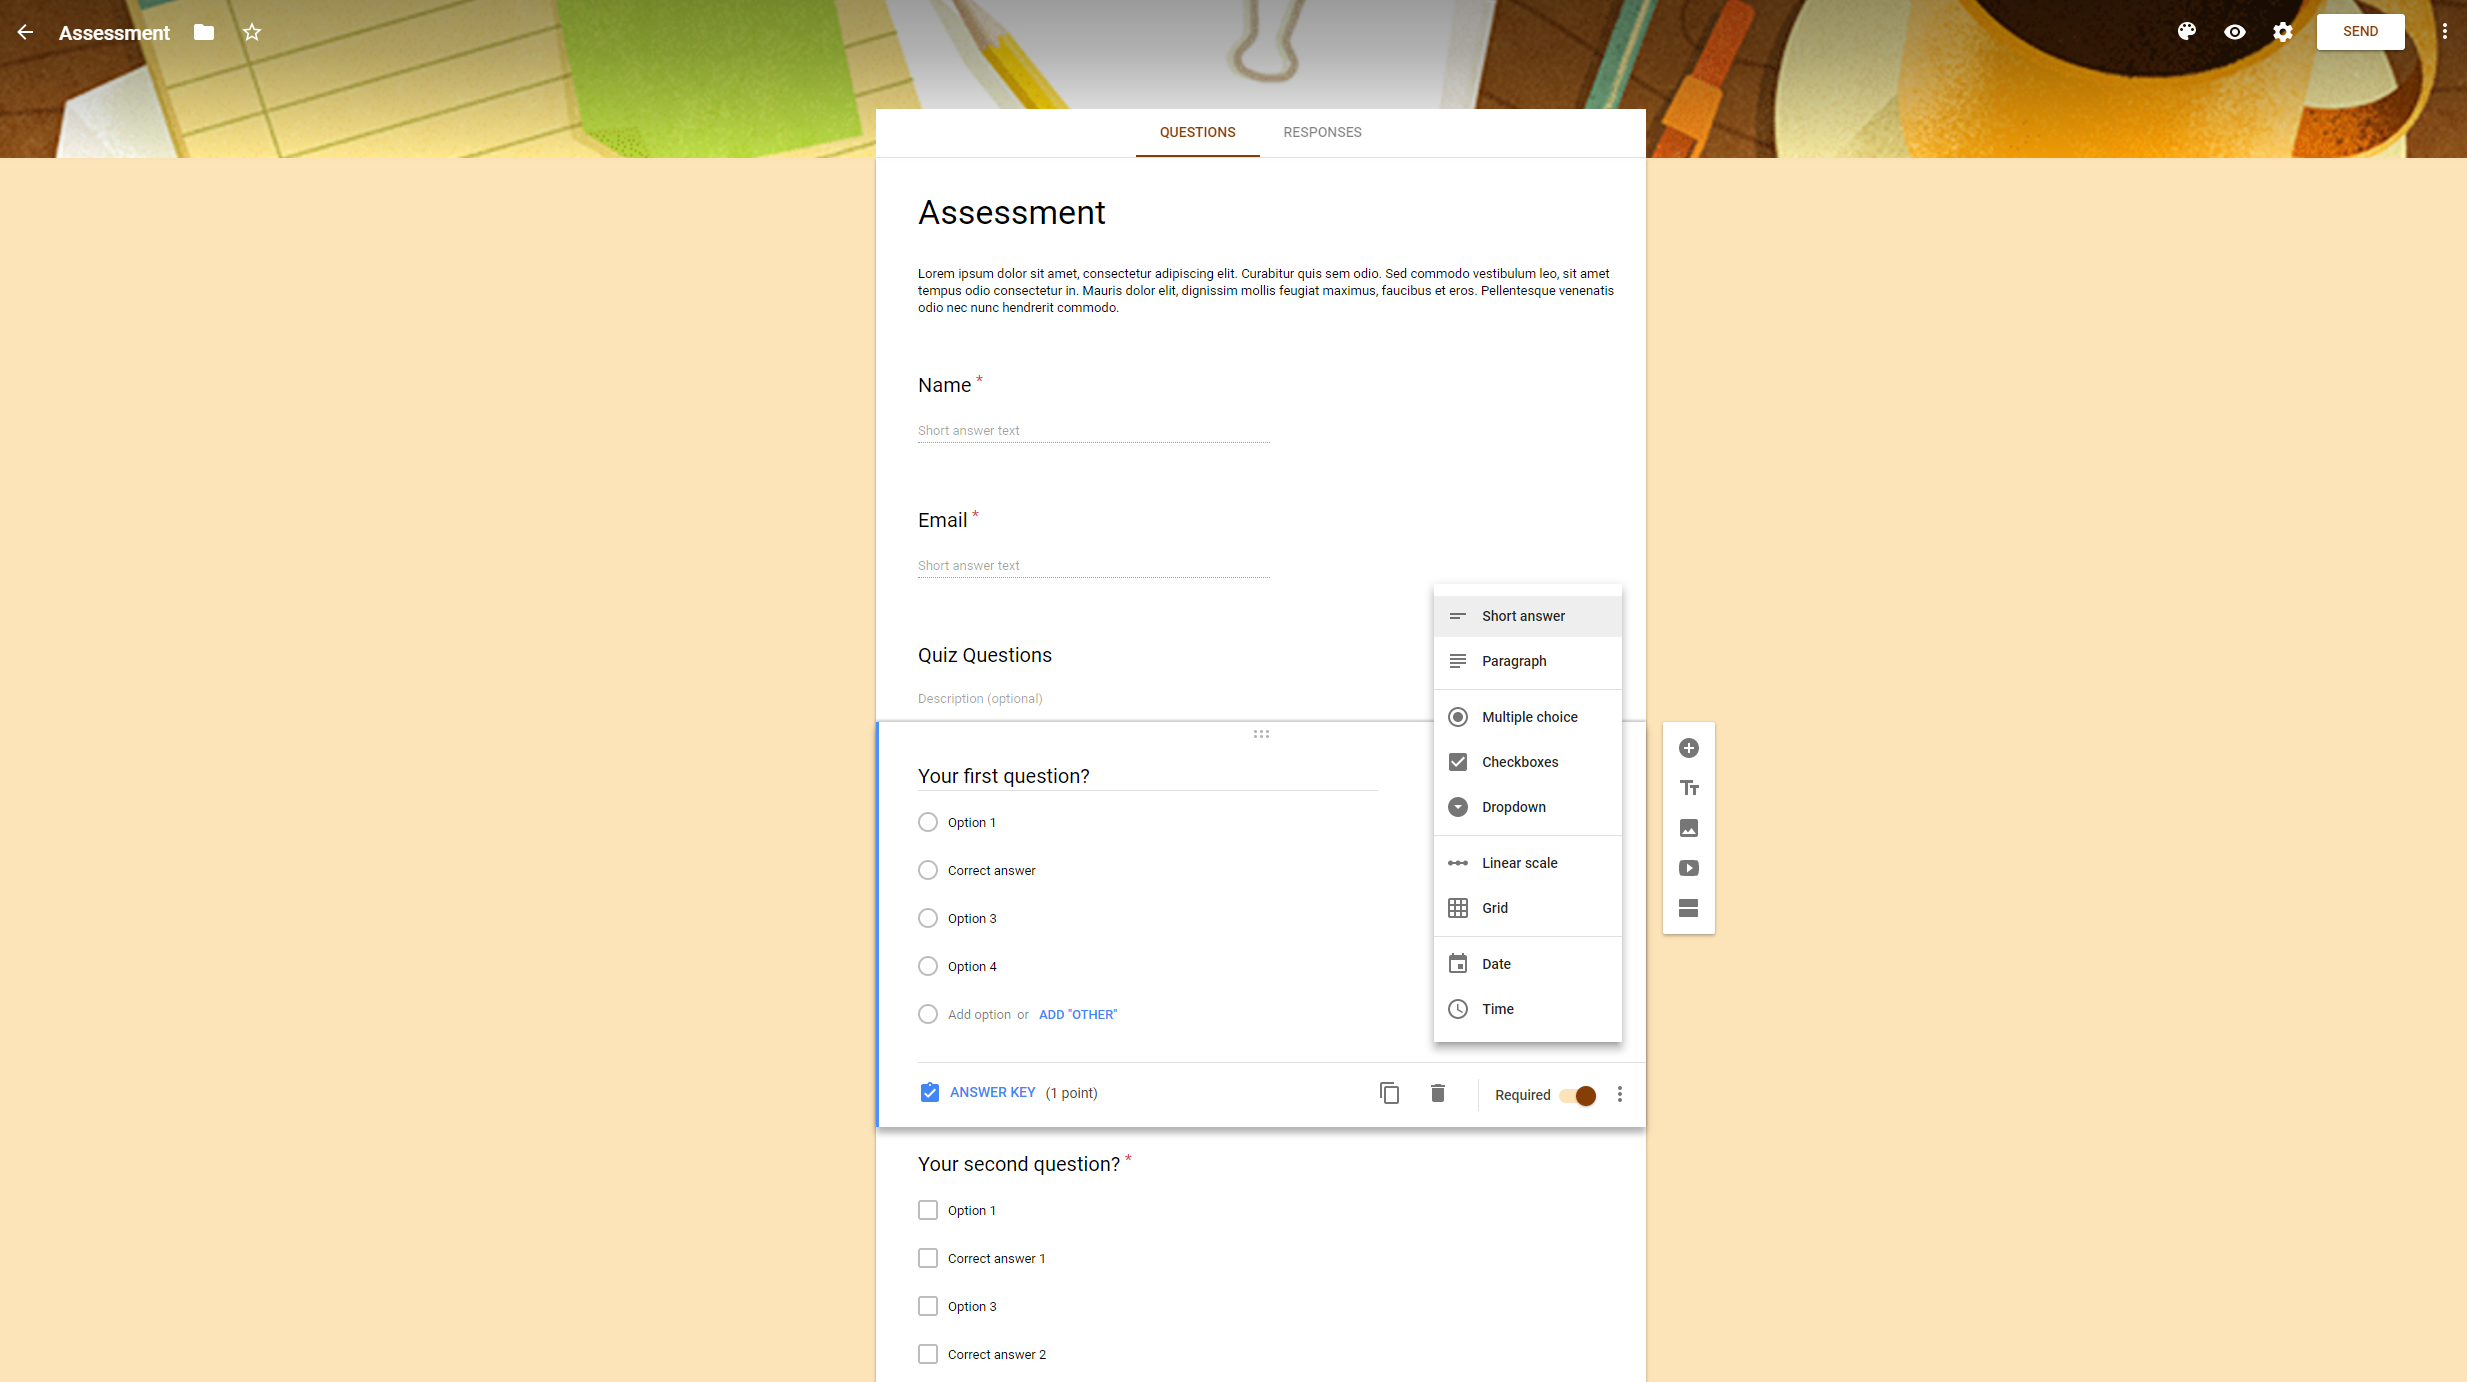 An image of an assessment created in Google Forms.